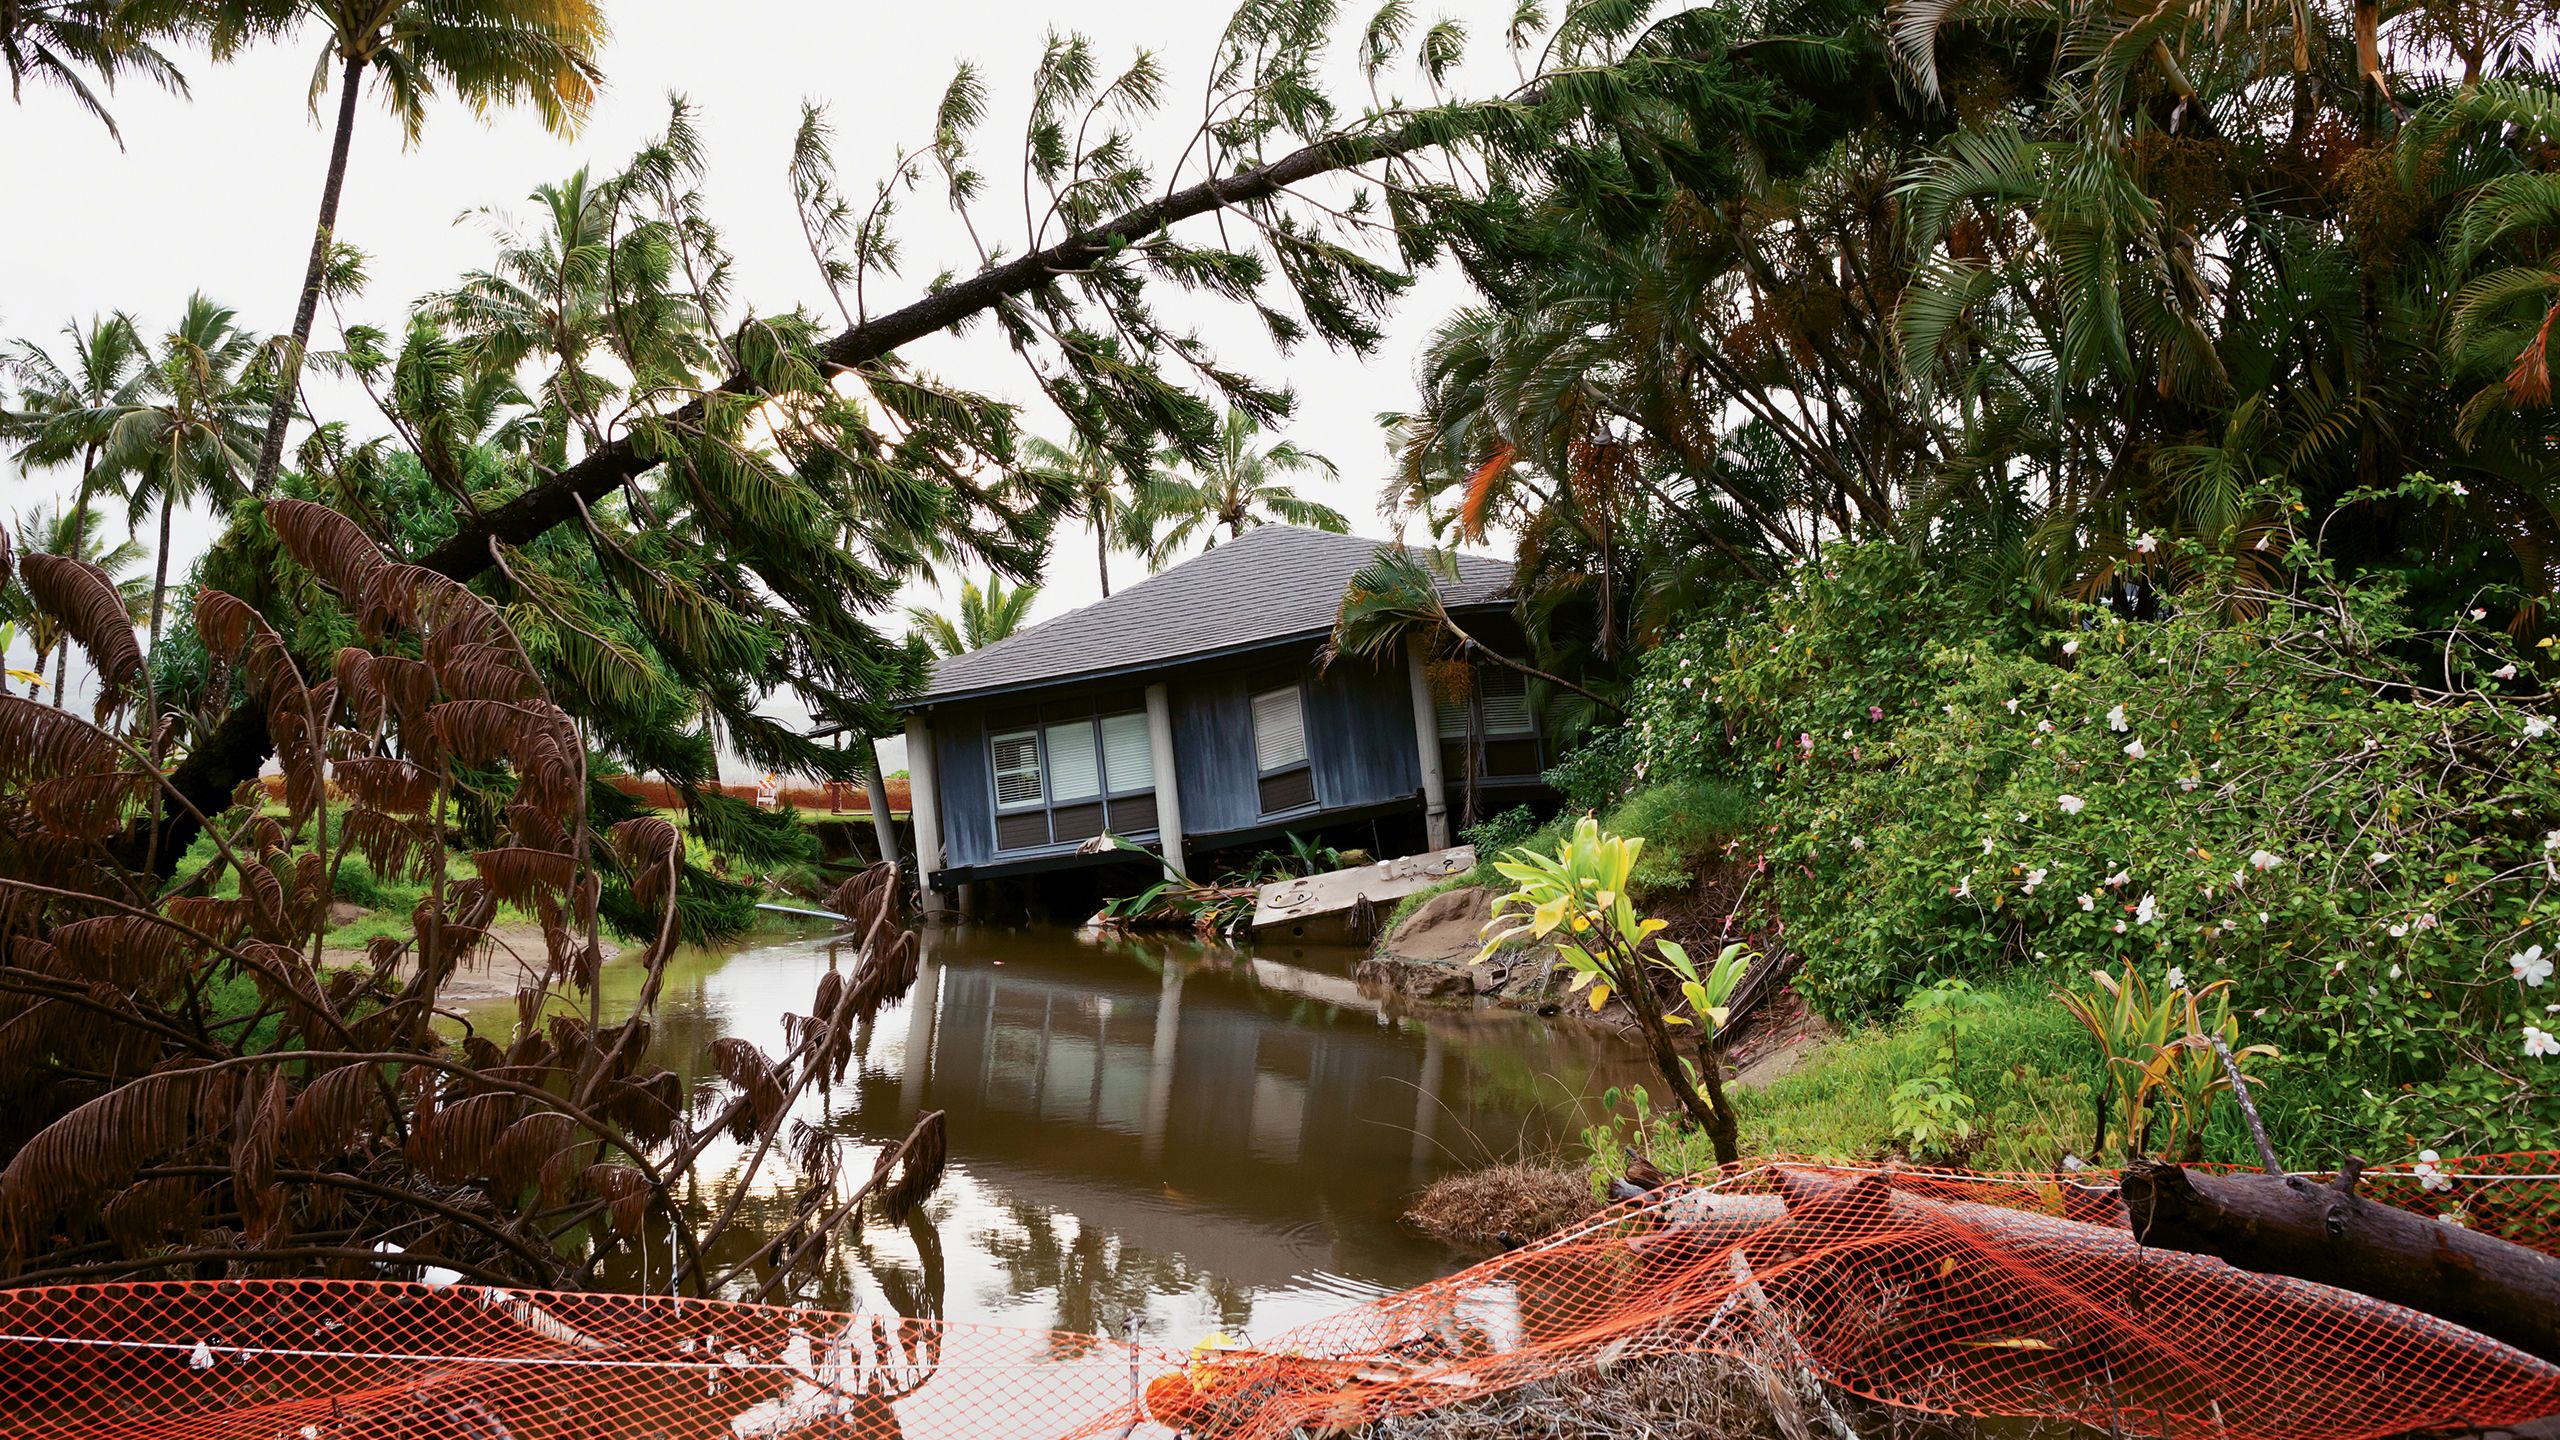 A flood-damaged house in Hanalei. The disaster gave locals the chance to address overcrowding. Photo by Mayakova/Shutterstock.com